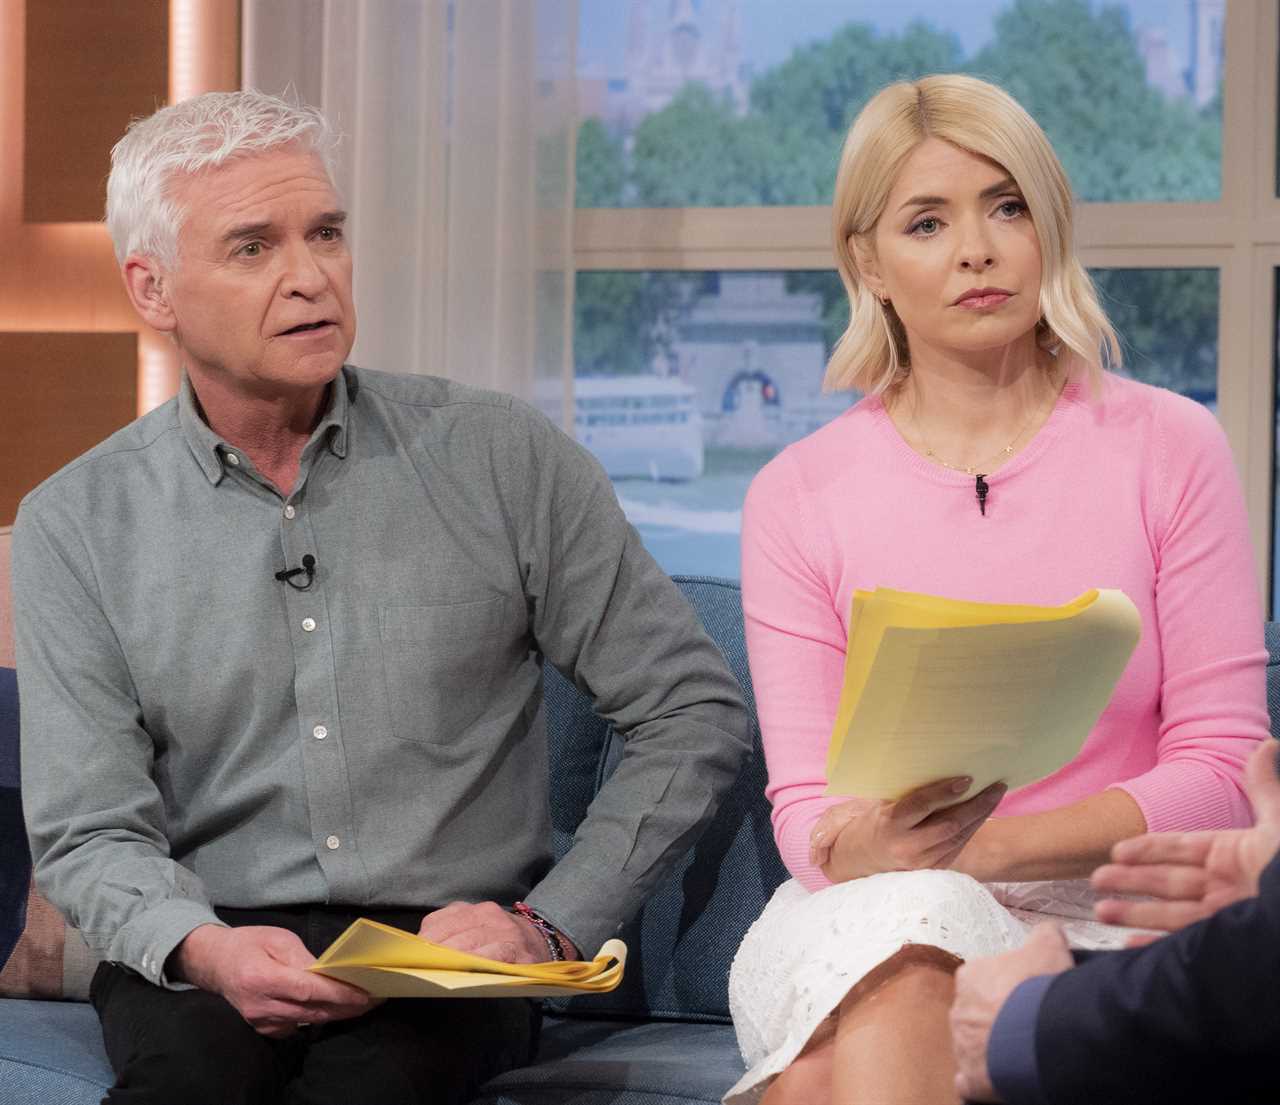 Eamonn Holmes takes another swipe at This Morning after ‘real reason’ he hates Phillip Schofield is revealed